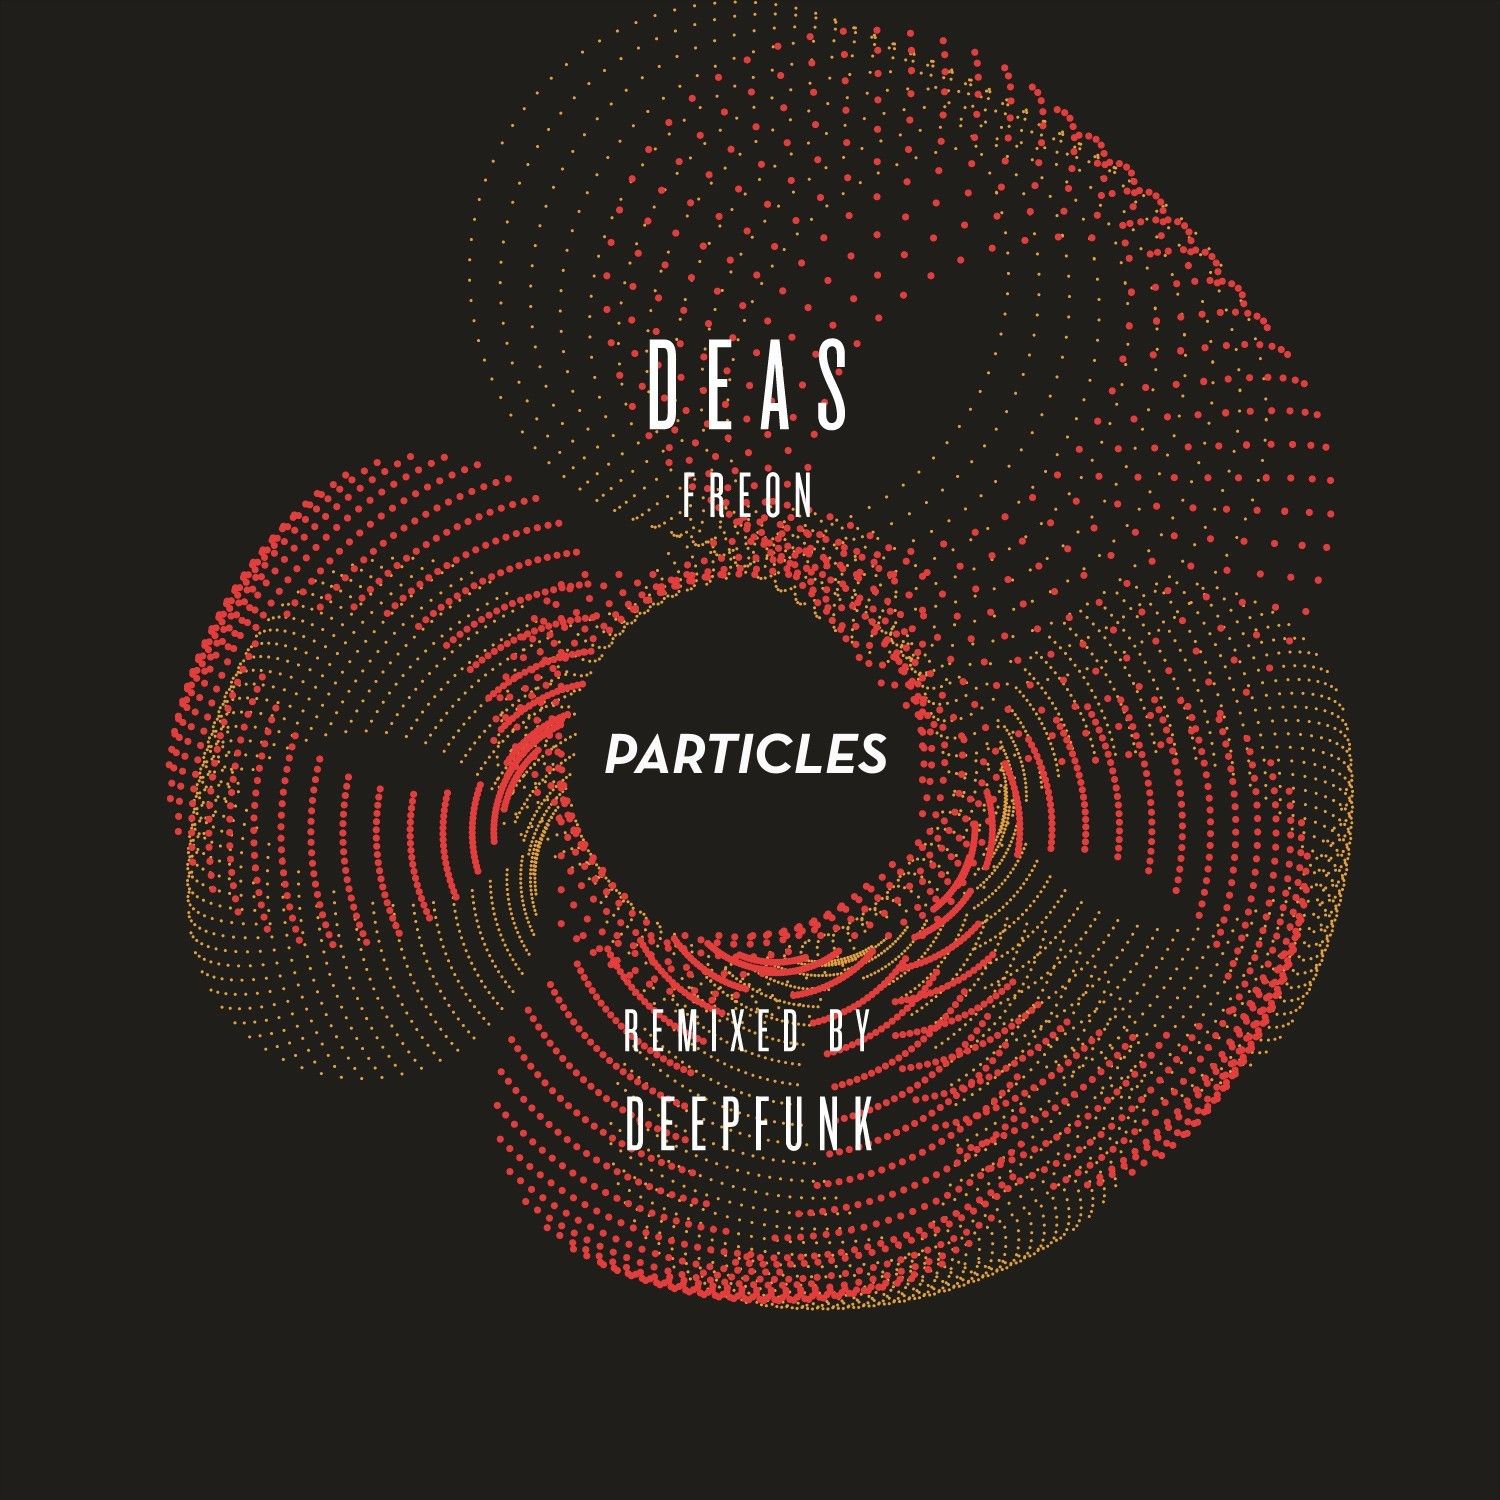 particles-deas-freoncover.jpg